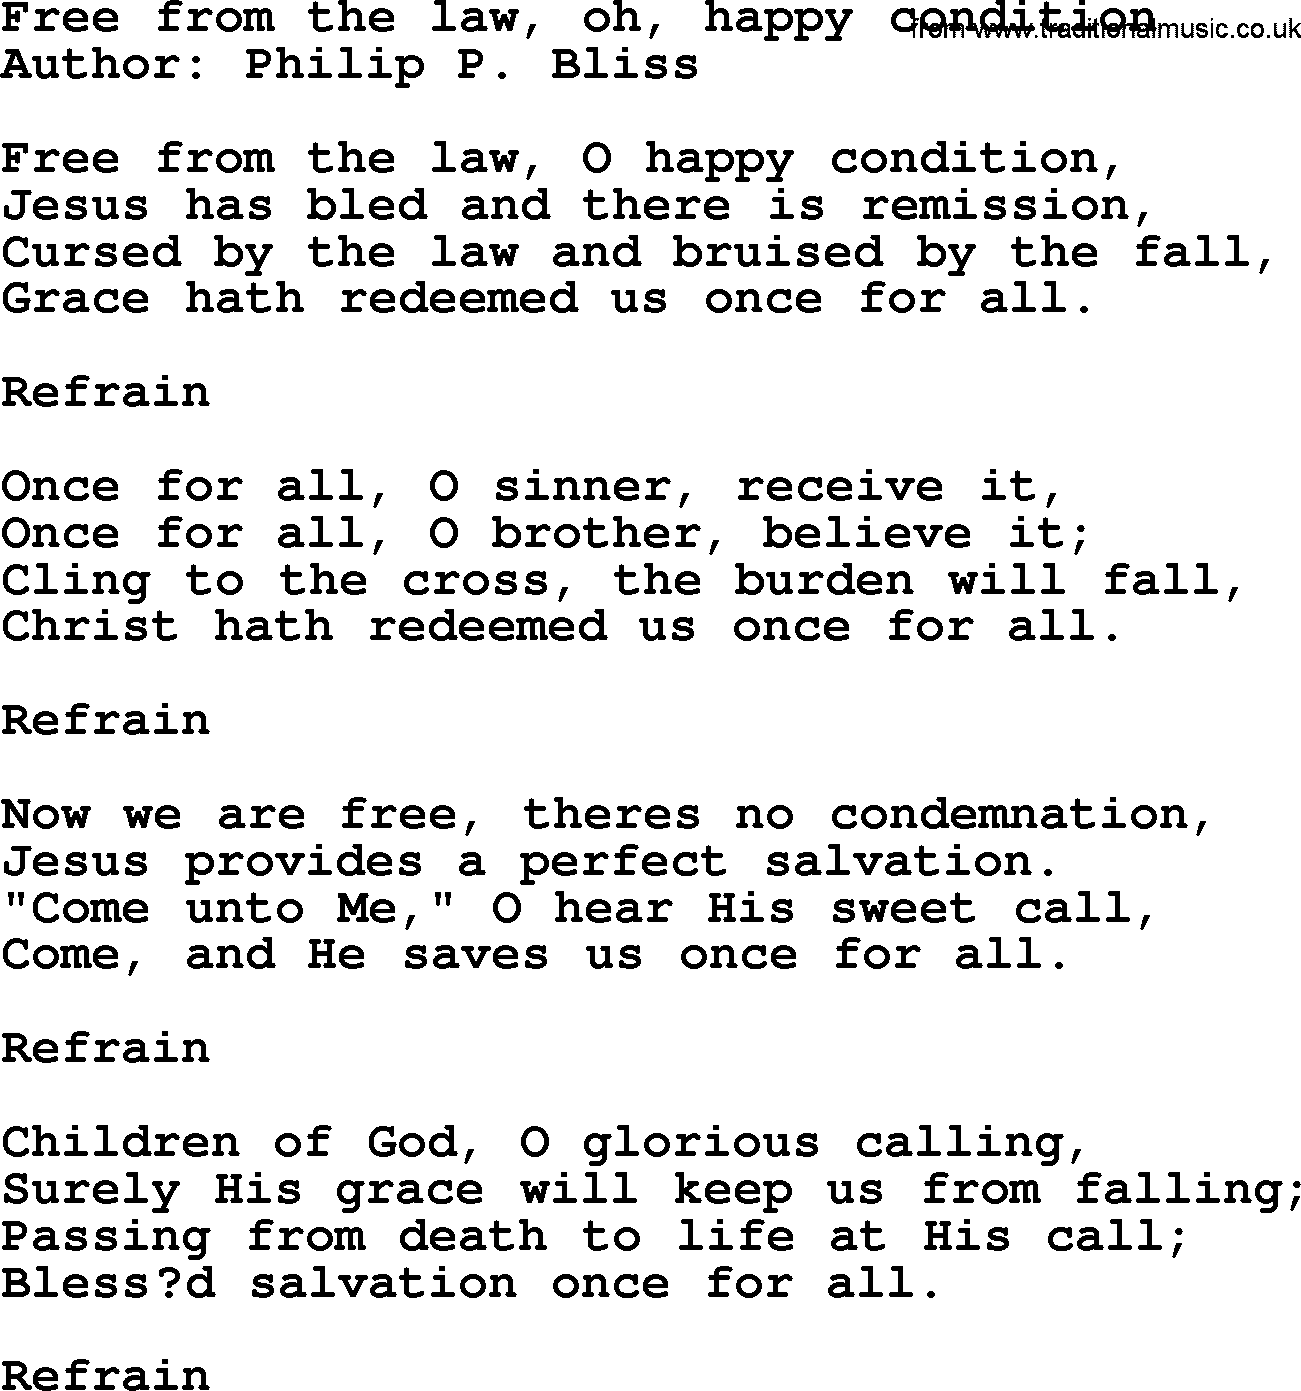 Top 500 Hymn: Free From The Law, Oh, Happy Condition, lyrics